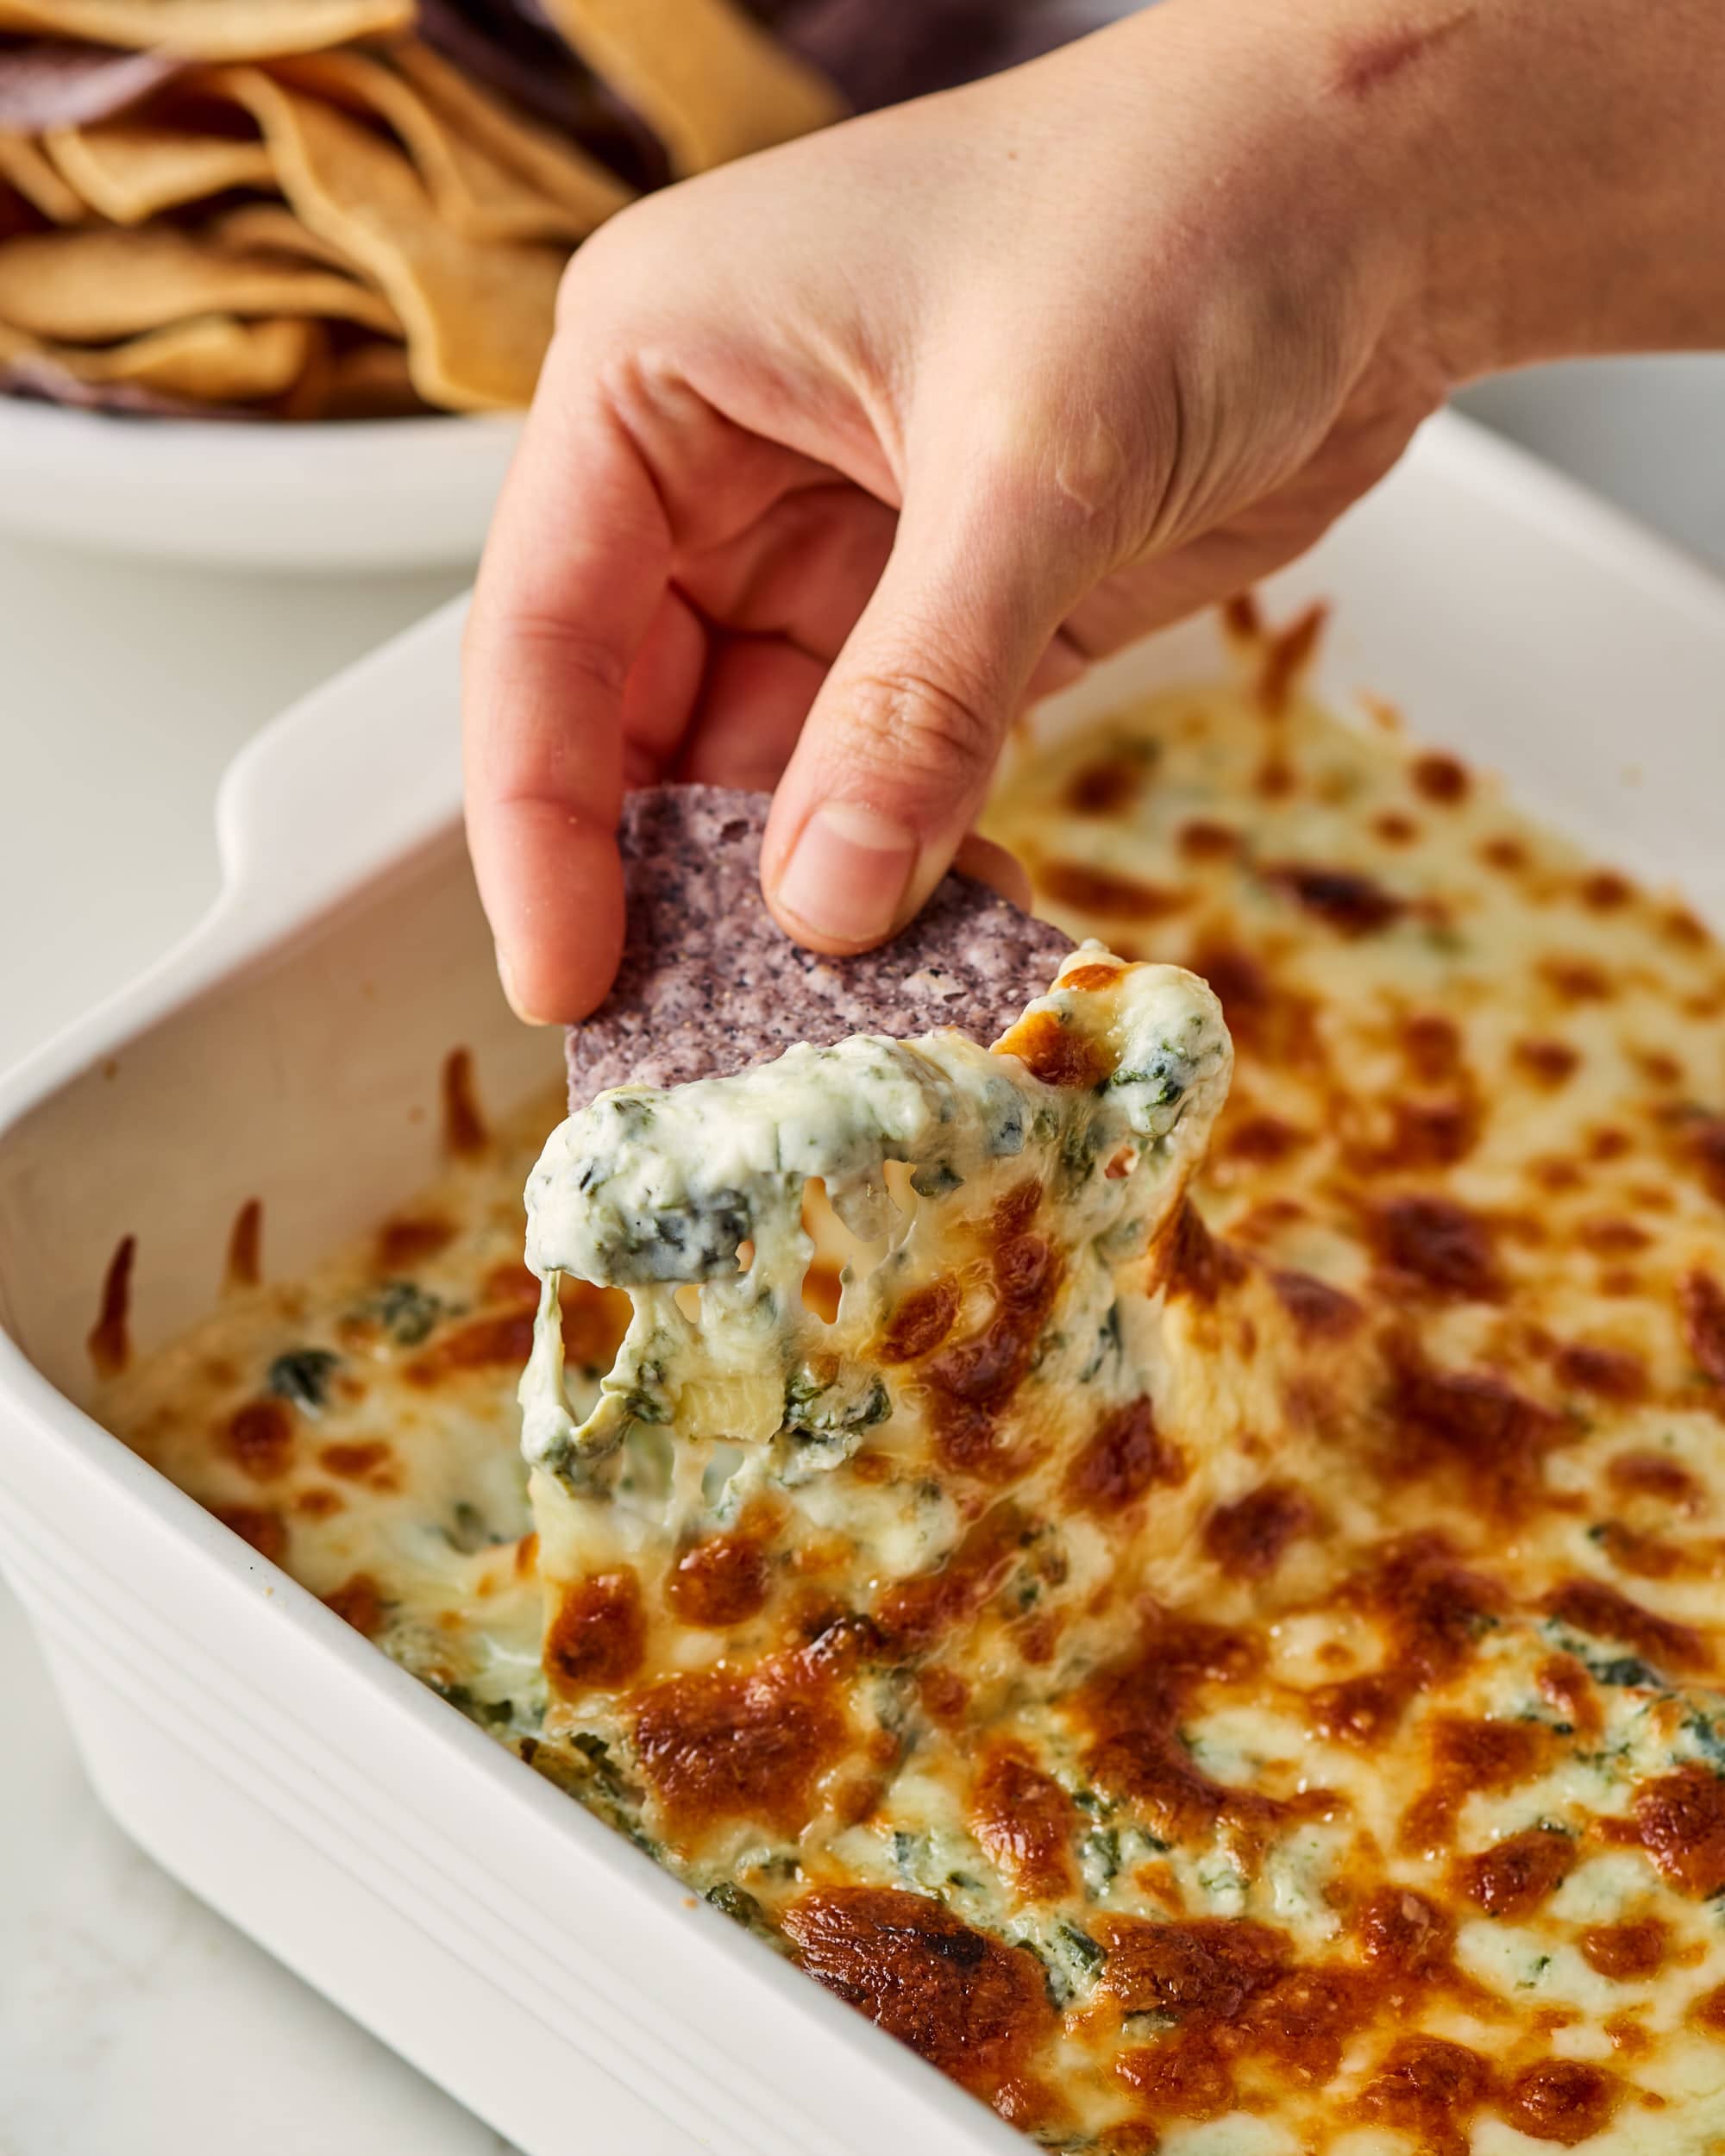 https://cdn.apartmenttherapy.info/image/upload/v1571426861/k/Photo/Recipes/2019-10-how-to-spinach-artichoke-dip/2019-10-14_Kitchn87856_HT-Spinach-Artichoke-Dip.jpg